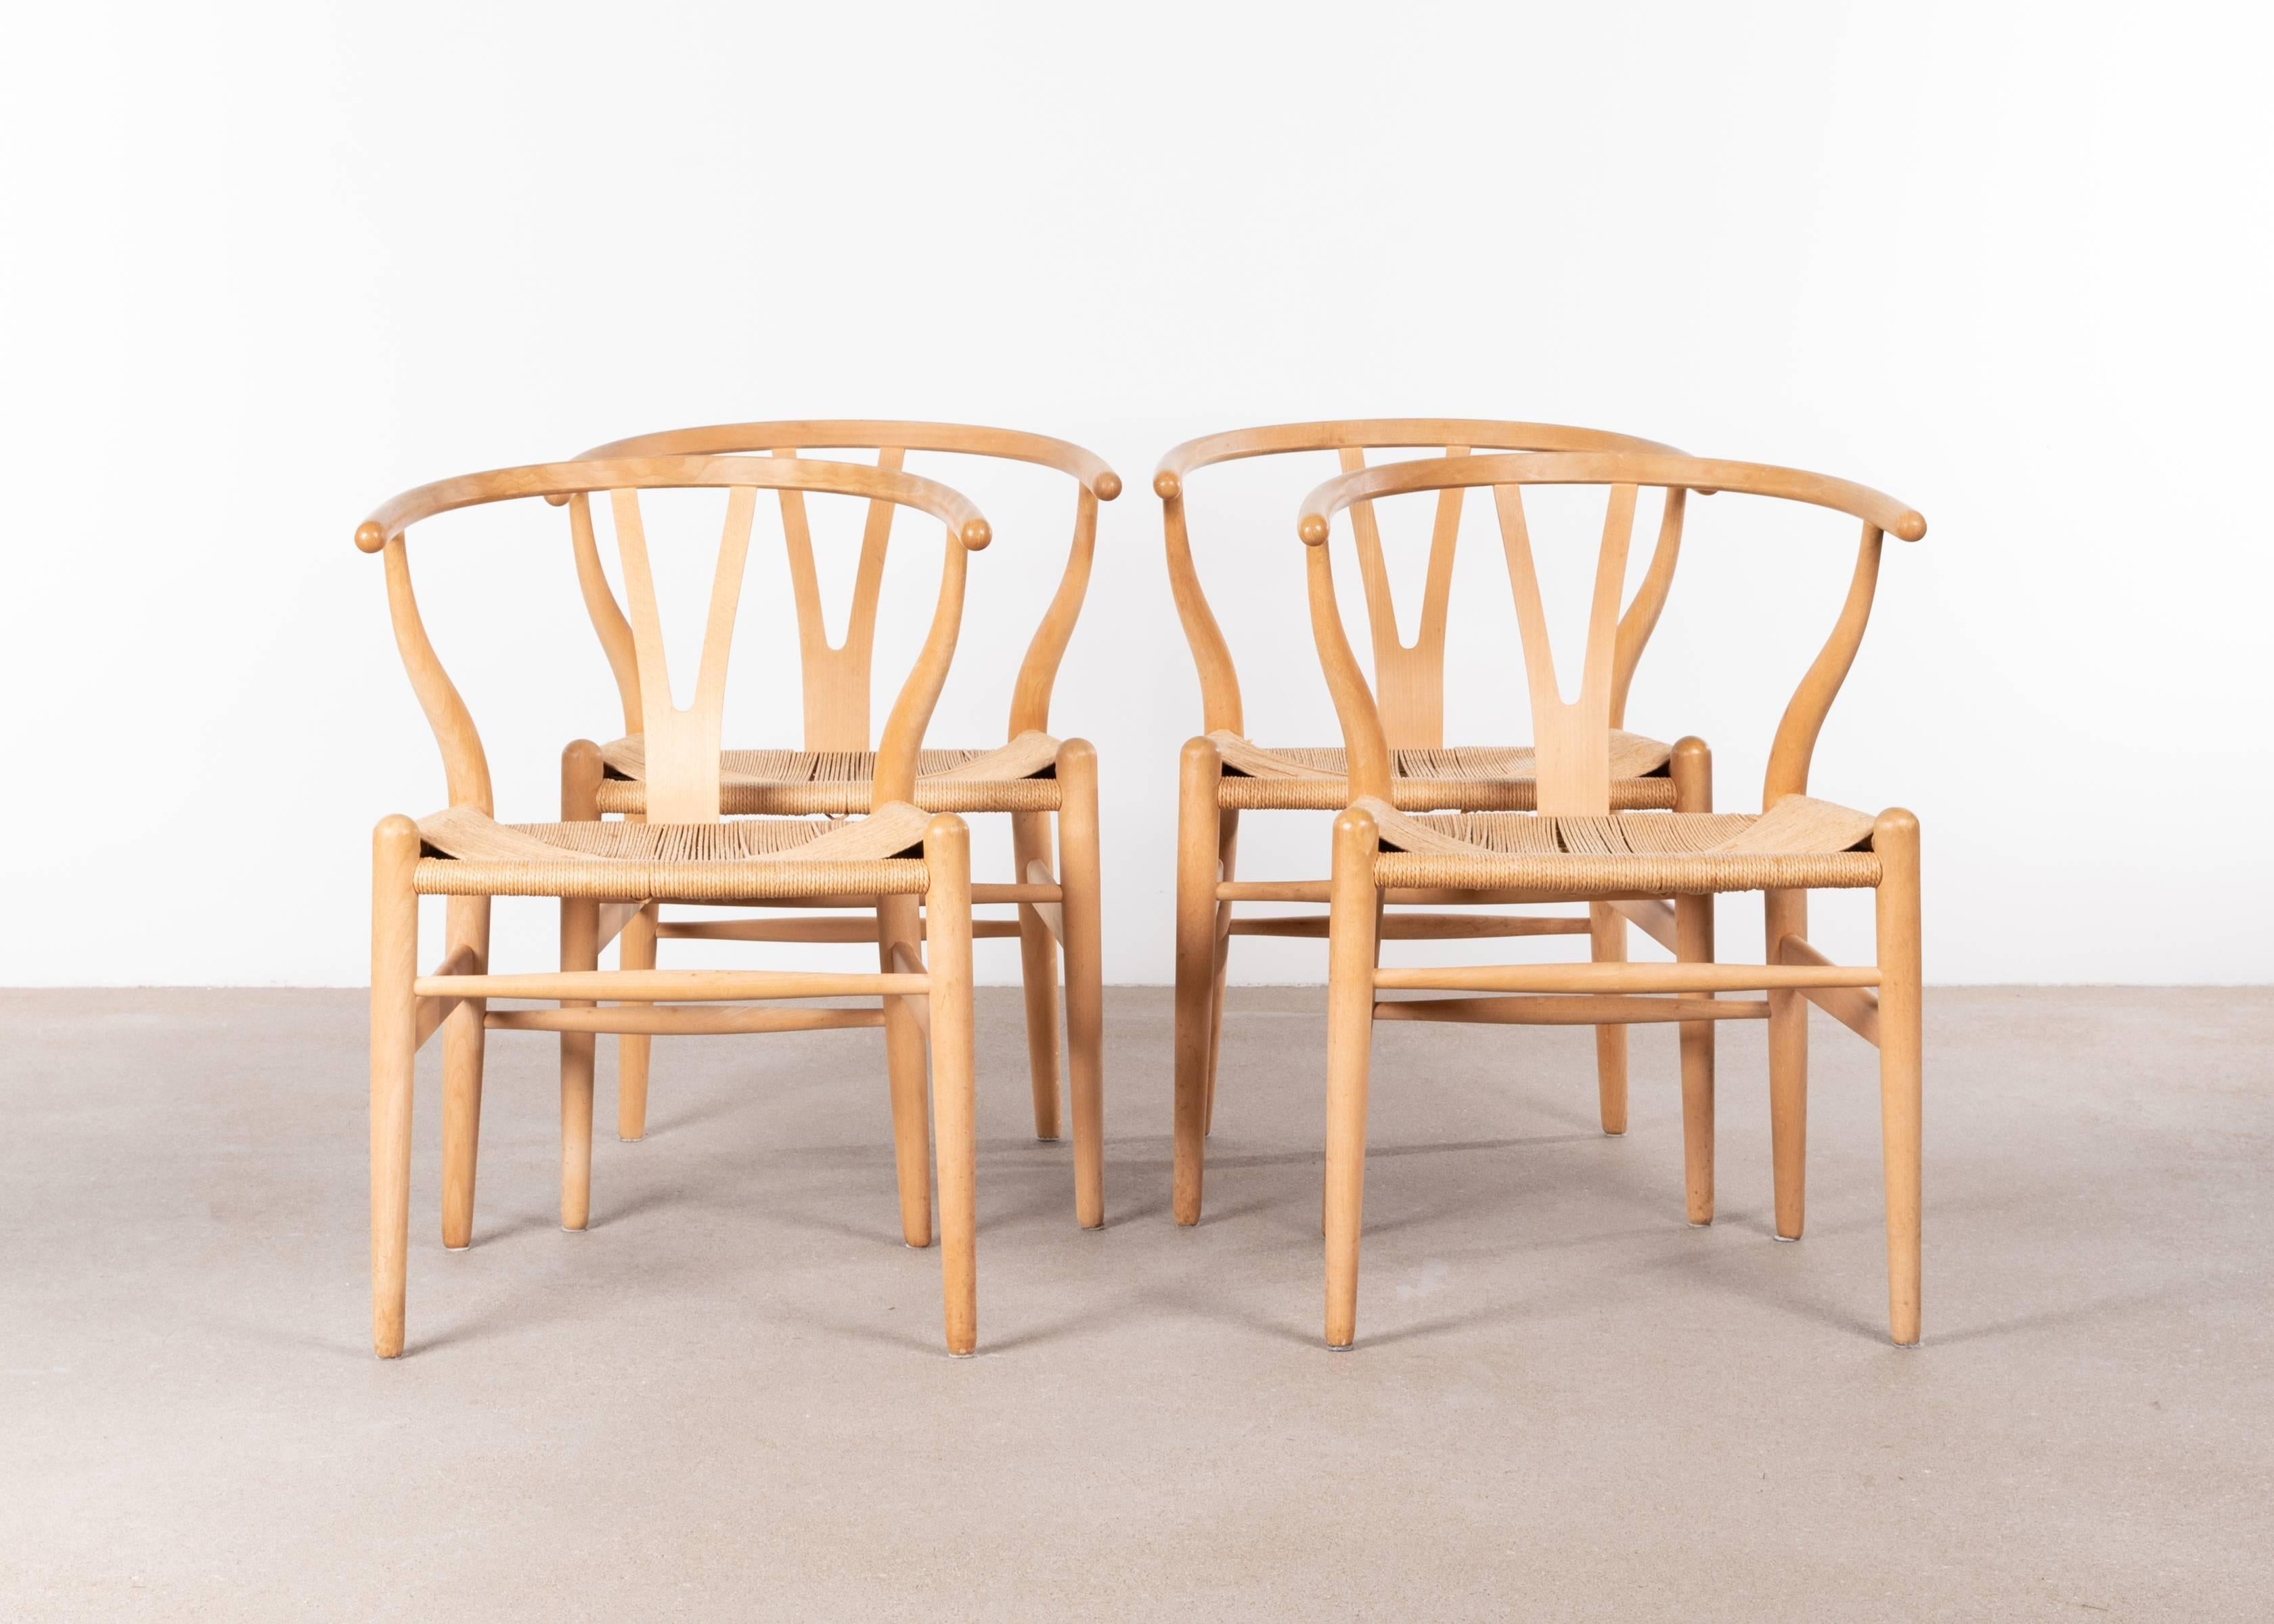 Nice set of Wishbone chairs (model CH24) in light wood by by Hans Wagner for Carl Hansen & Søn. Very good condition with solid frames and no damage to the papercord. All chairs are signed with manufacturer label.